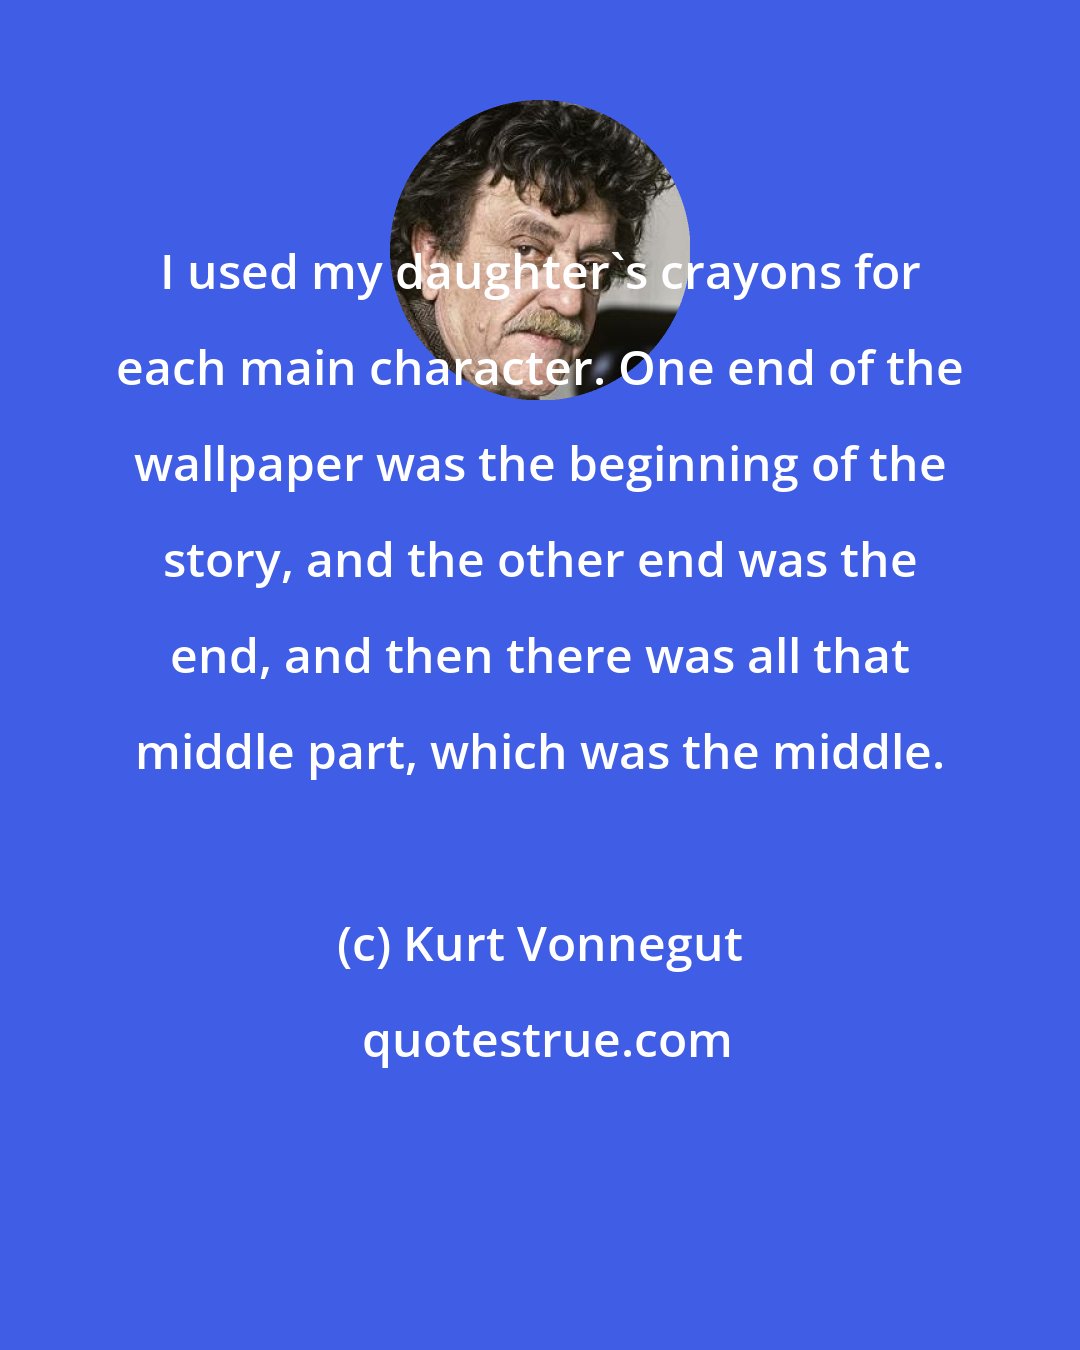 Kurt Vonnegut: I used my daughter's crayons for each main character. One end of the wallpaper was the beginning of the story, and the other end was the end, and then there was all that middle part, which was the middle.